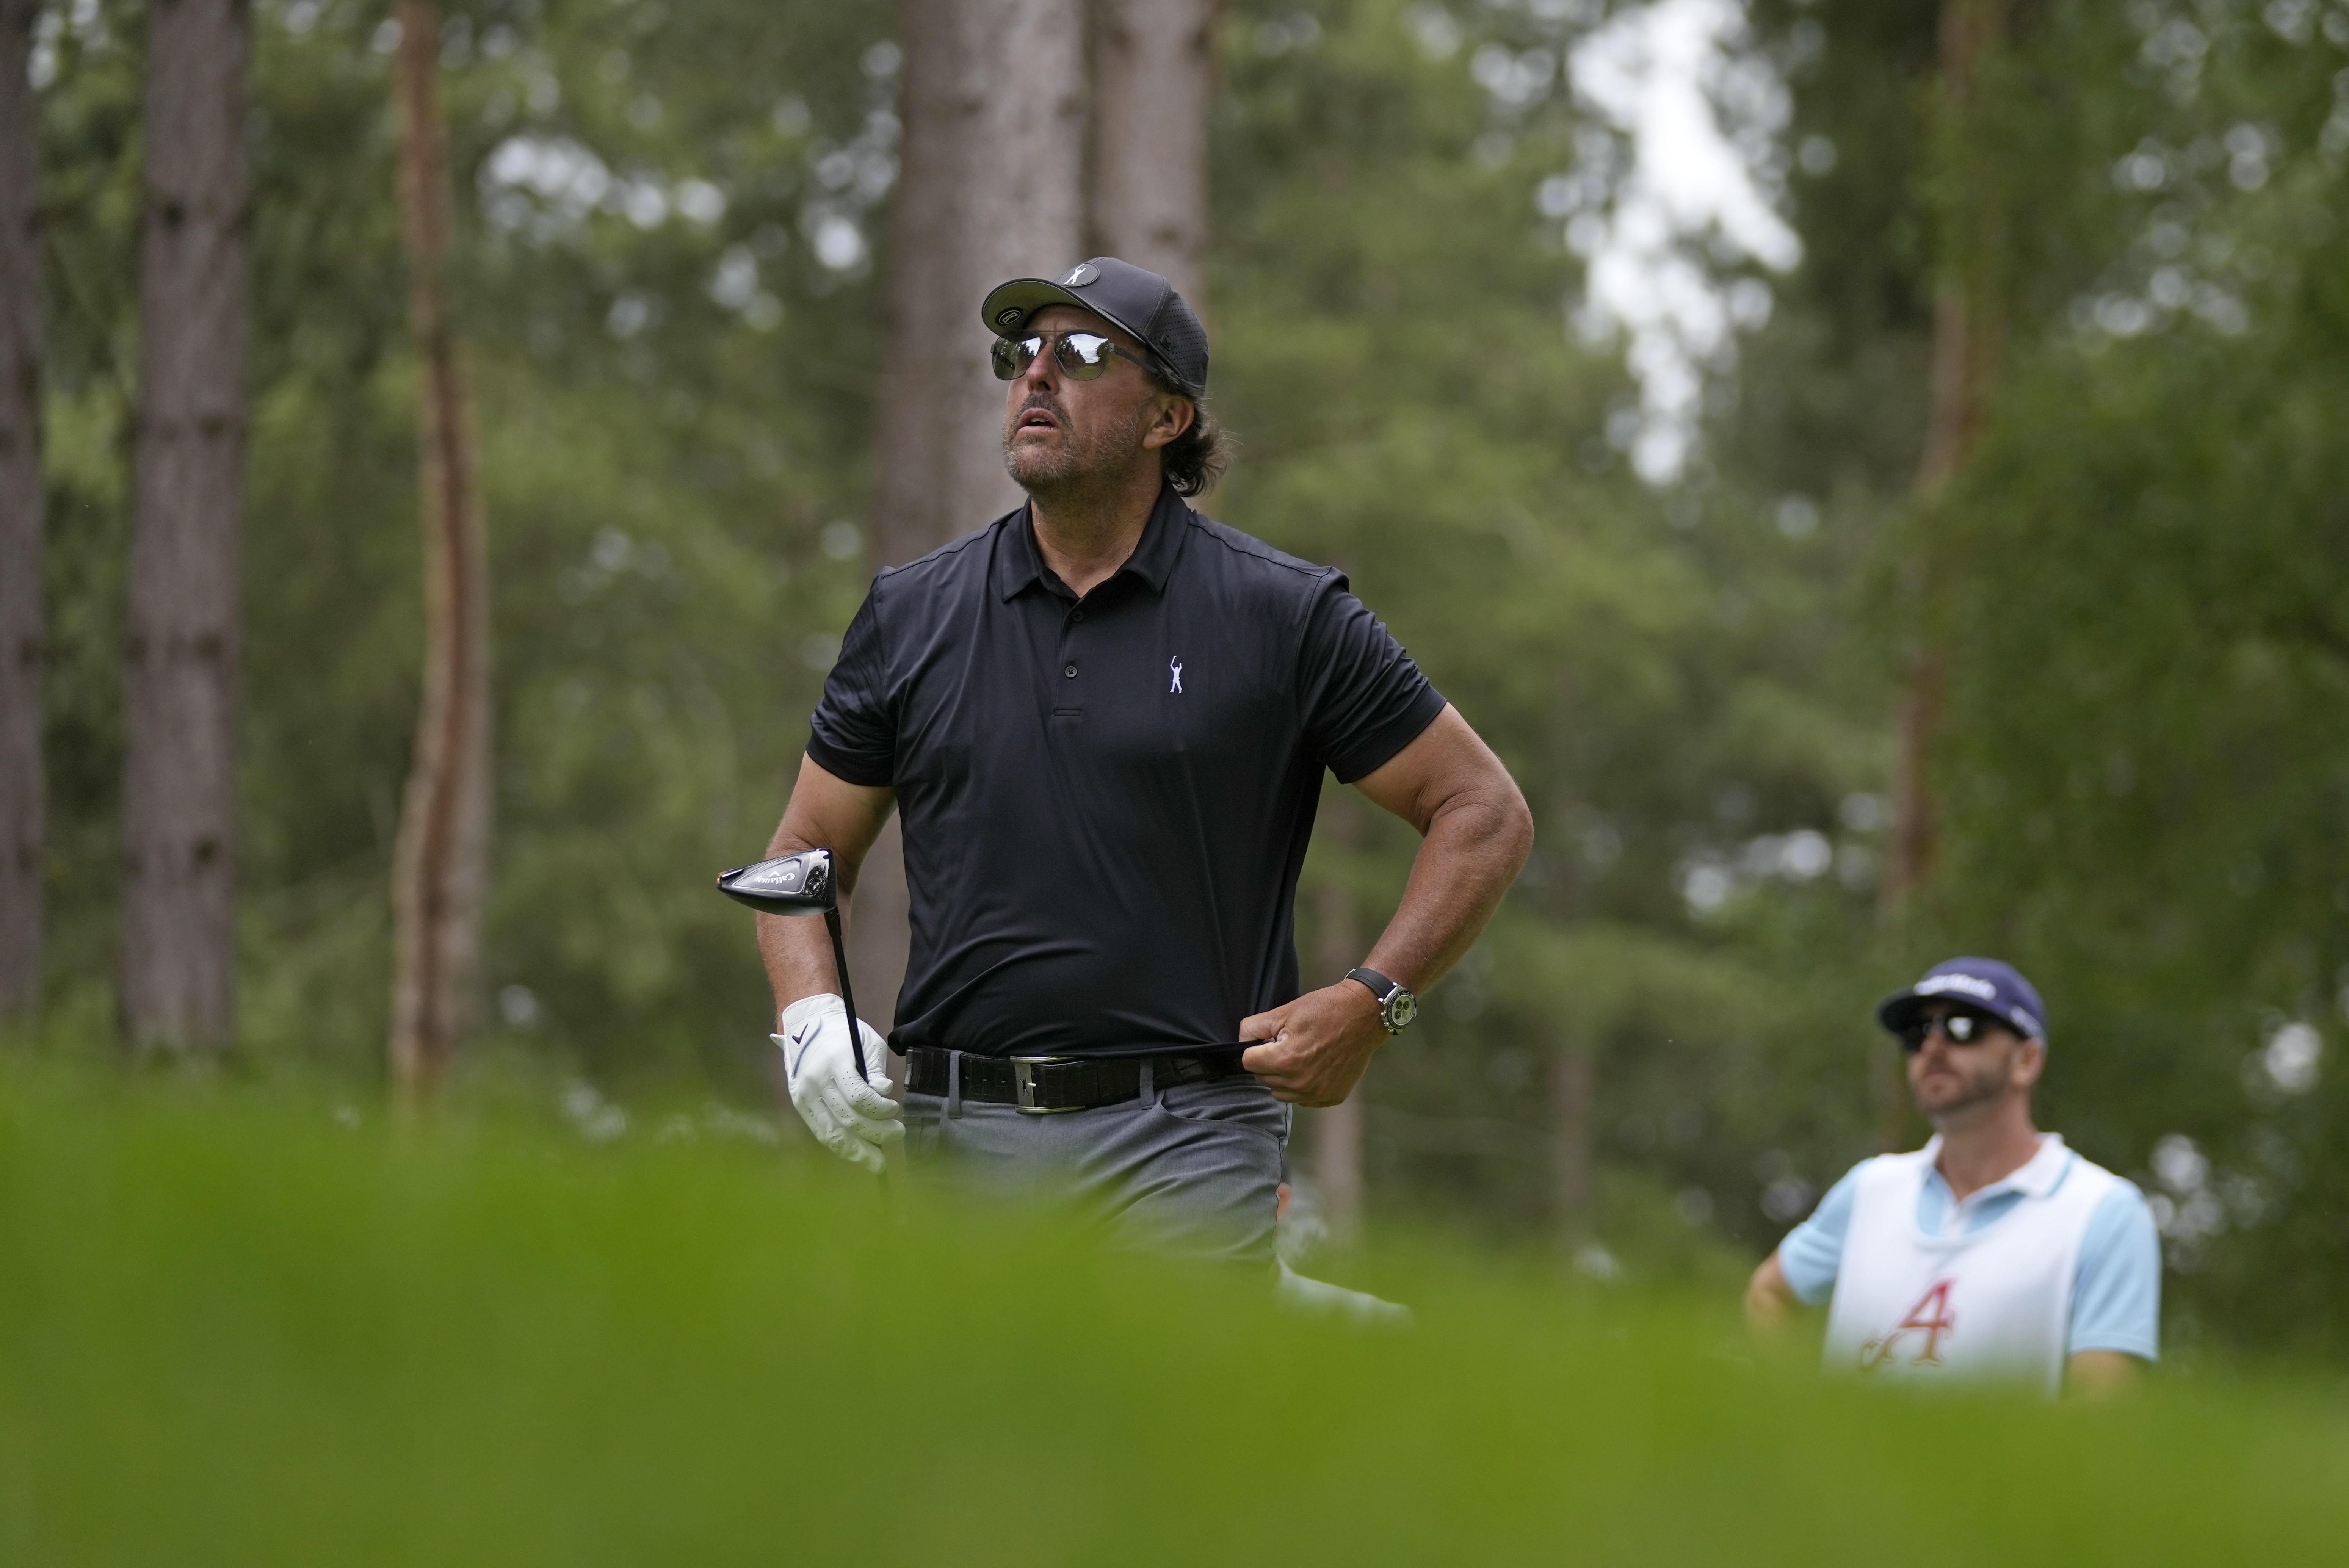 LIV Golf Invitational Series Day 3 FREE LIVE STREAM (6/11/22) Watch Phil Mickelson, Dustin Johnson at Centurion Club online Time, streaming, dates 